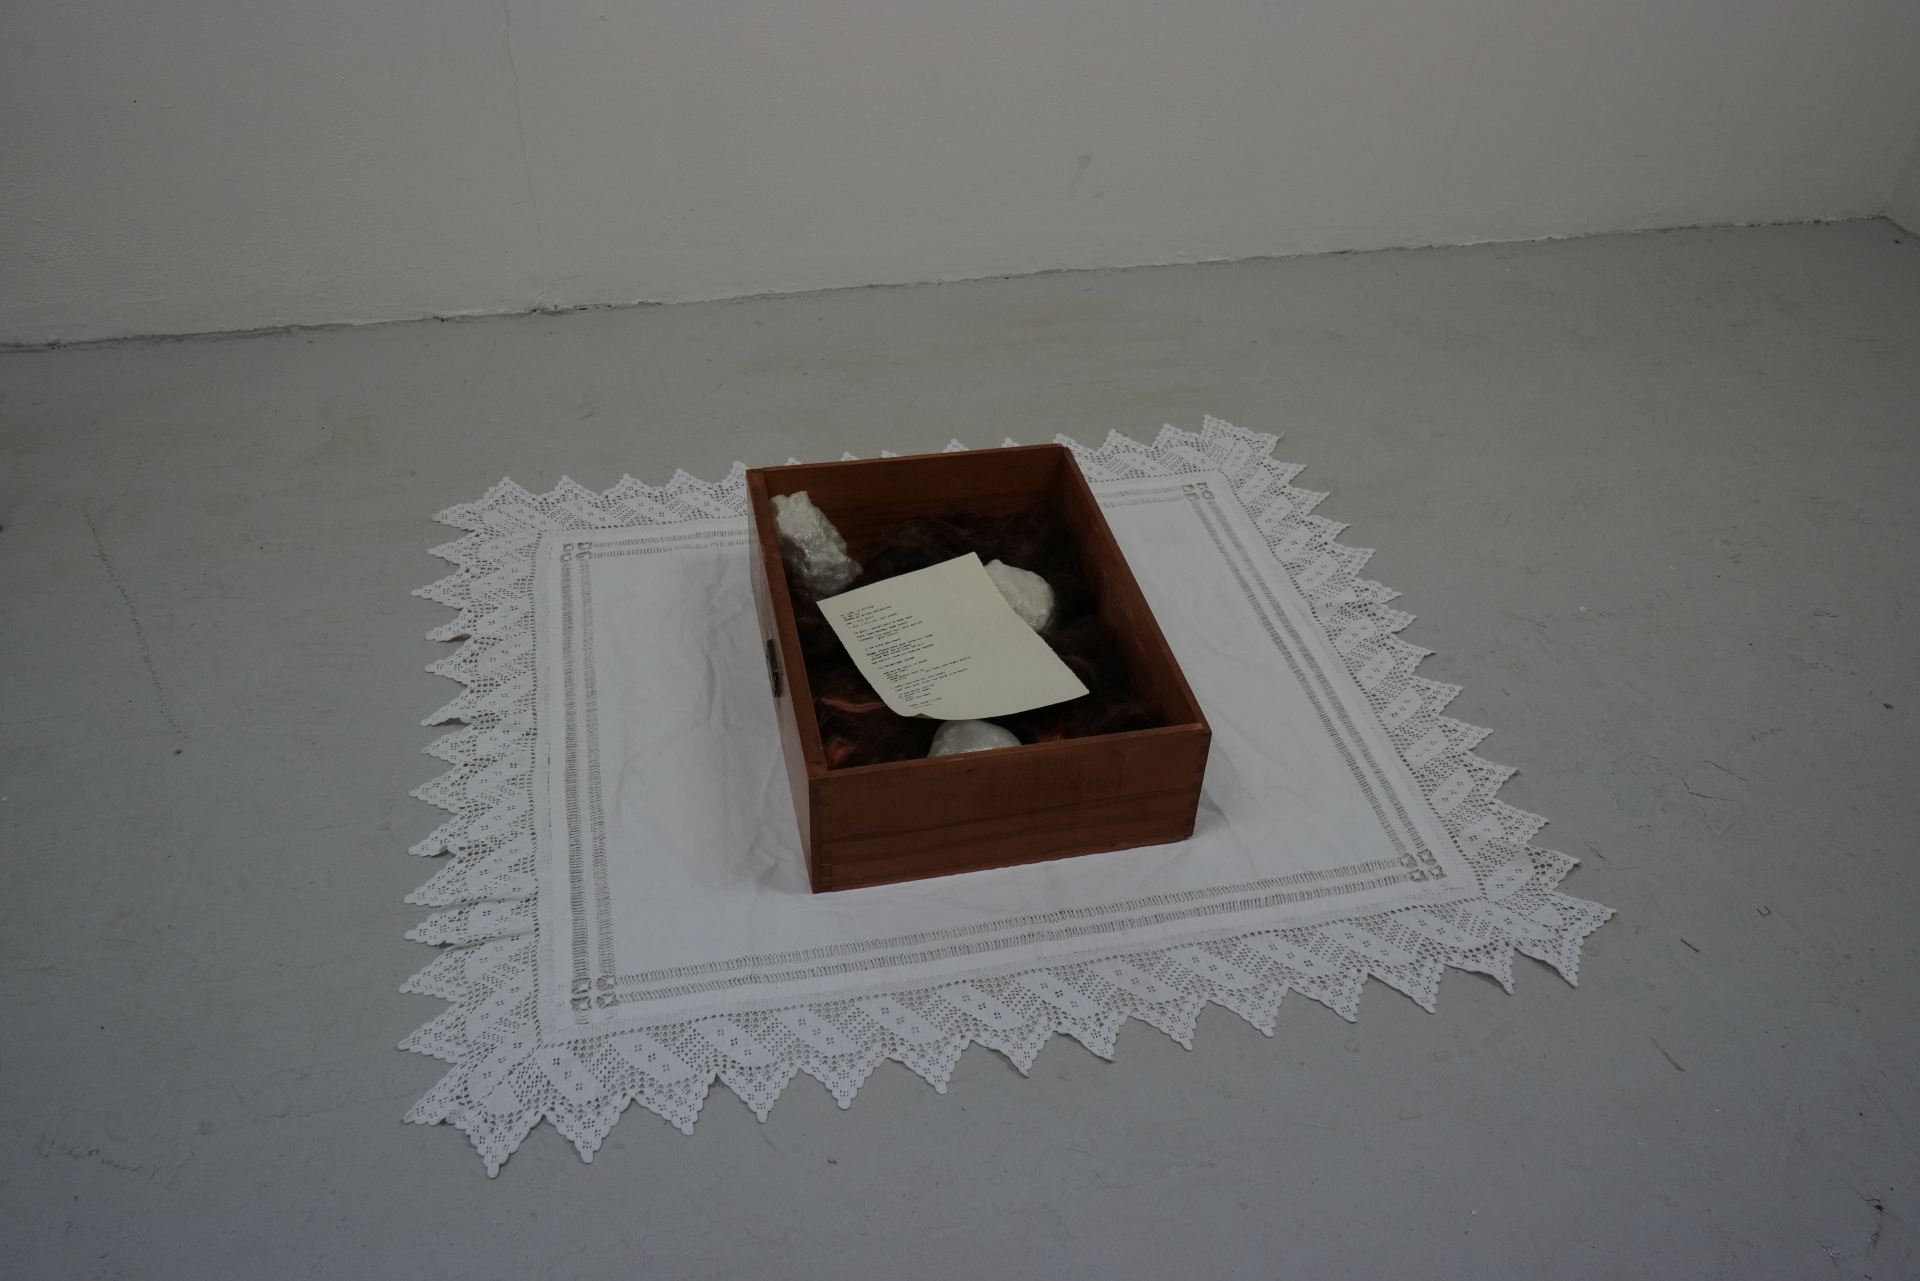 A bird's eye view of a box containing 3D printed stones and a handwritten note. The box is sitting on a white tablecloth.